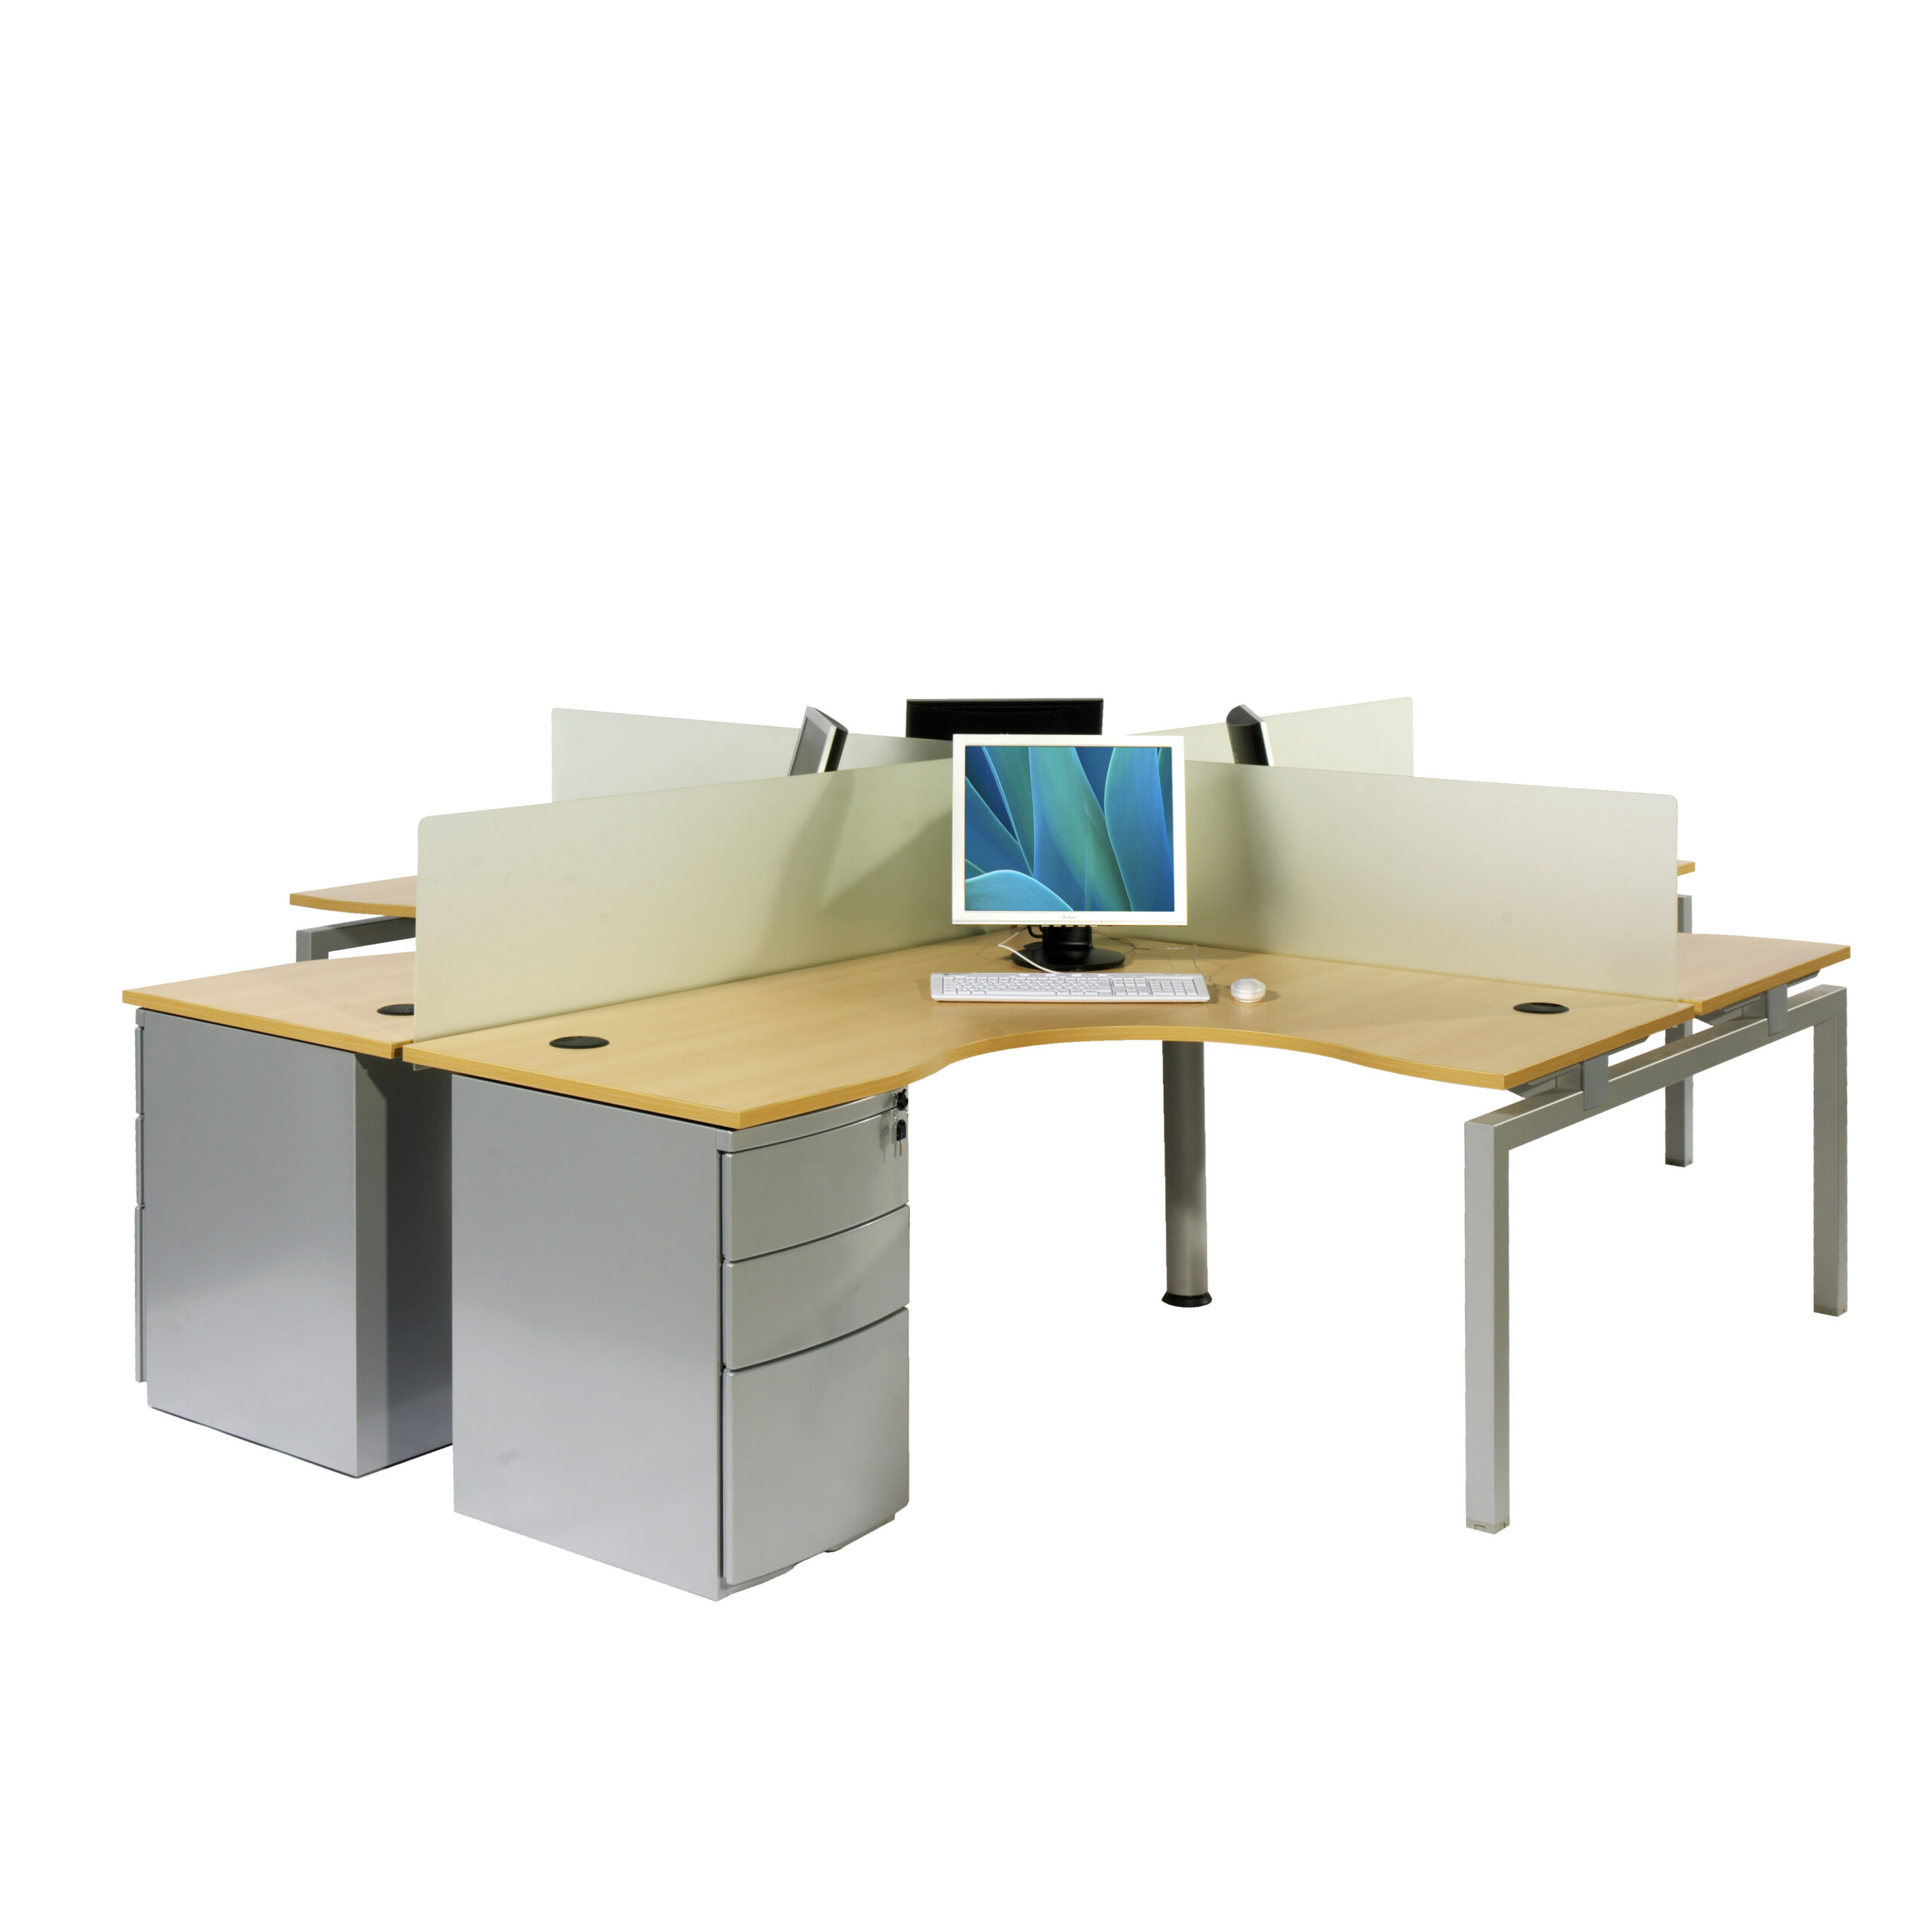 8.Bench Profile with 4 person pod and desk height pedestal